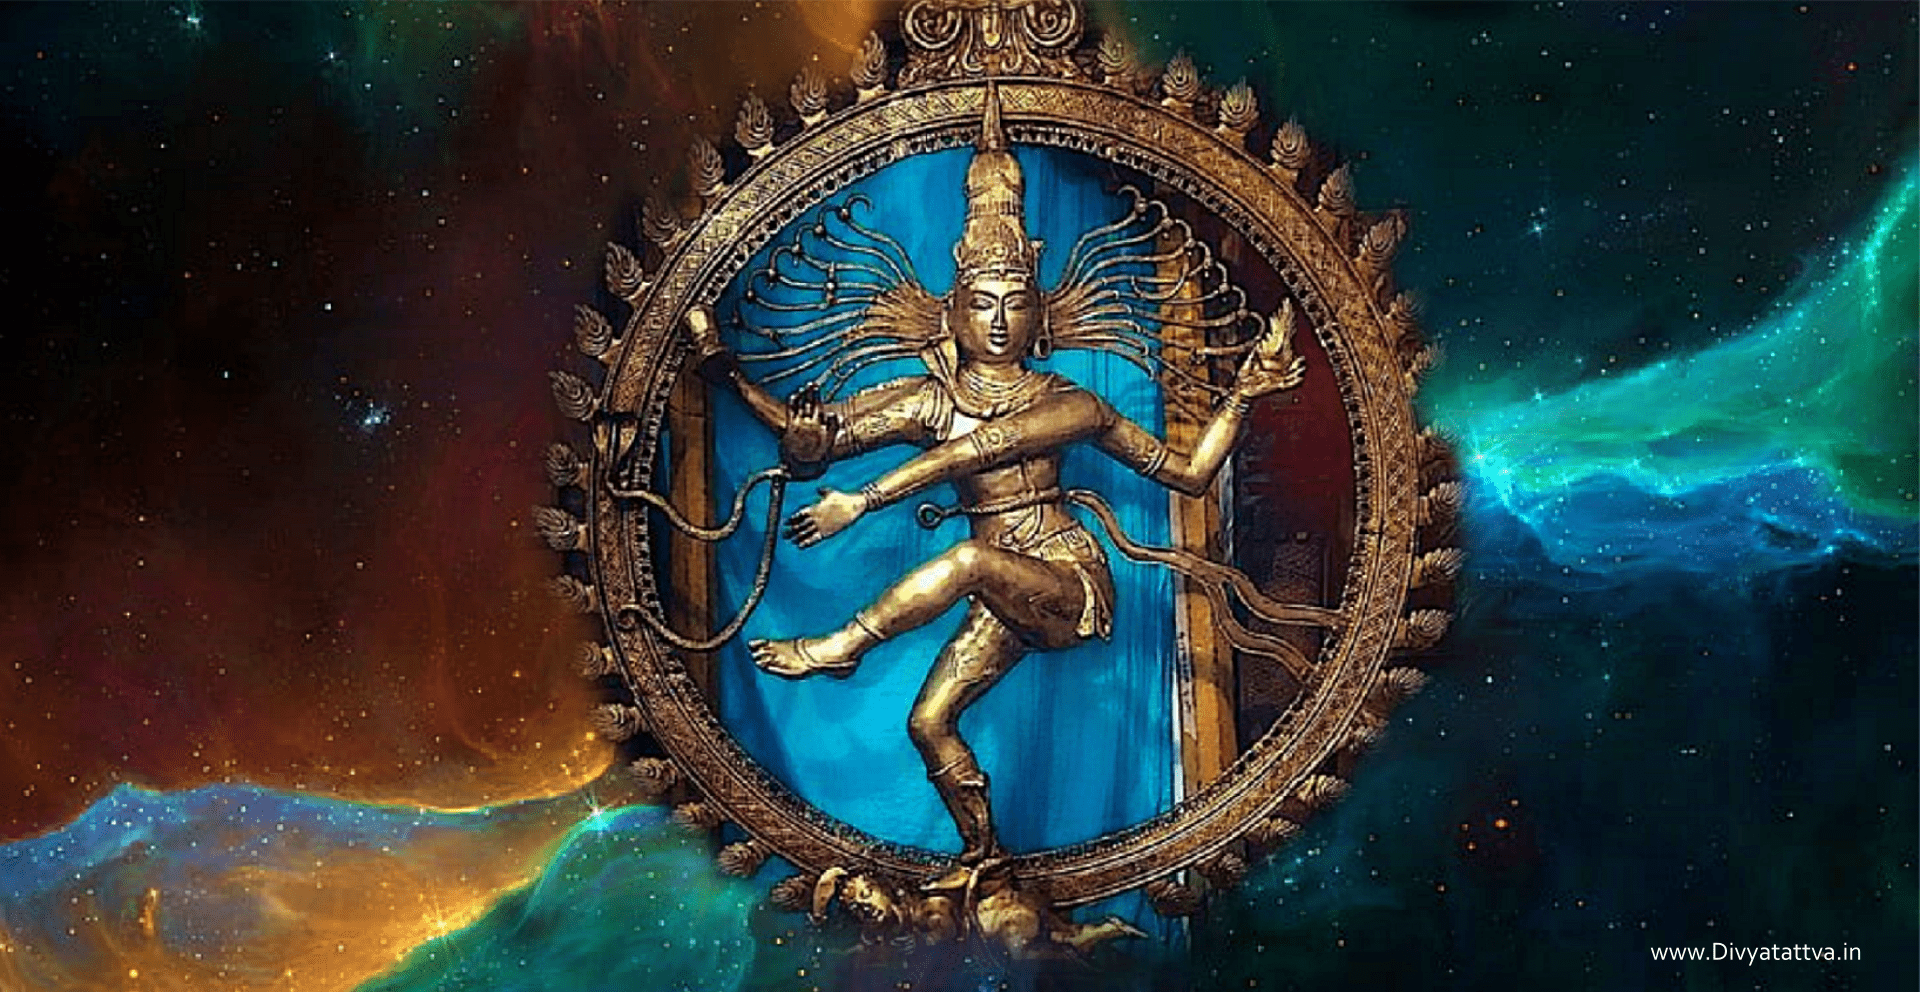 What are some epic and unseen wallpapers of Lord Shiva  Quora